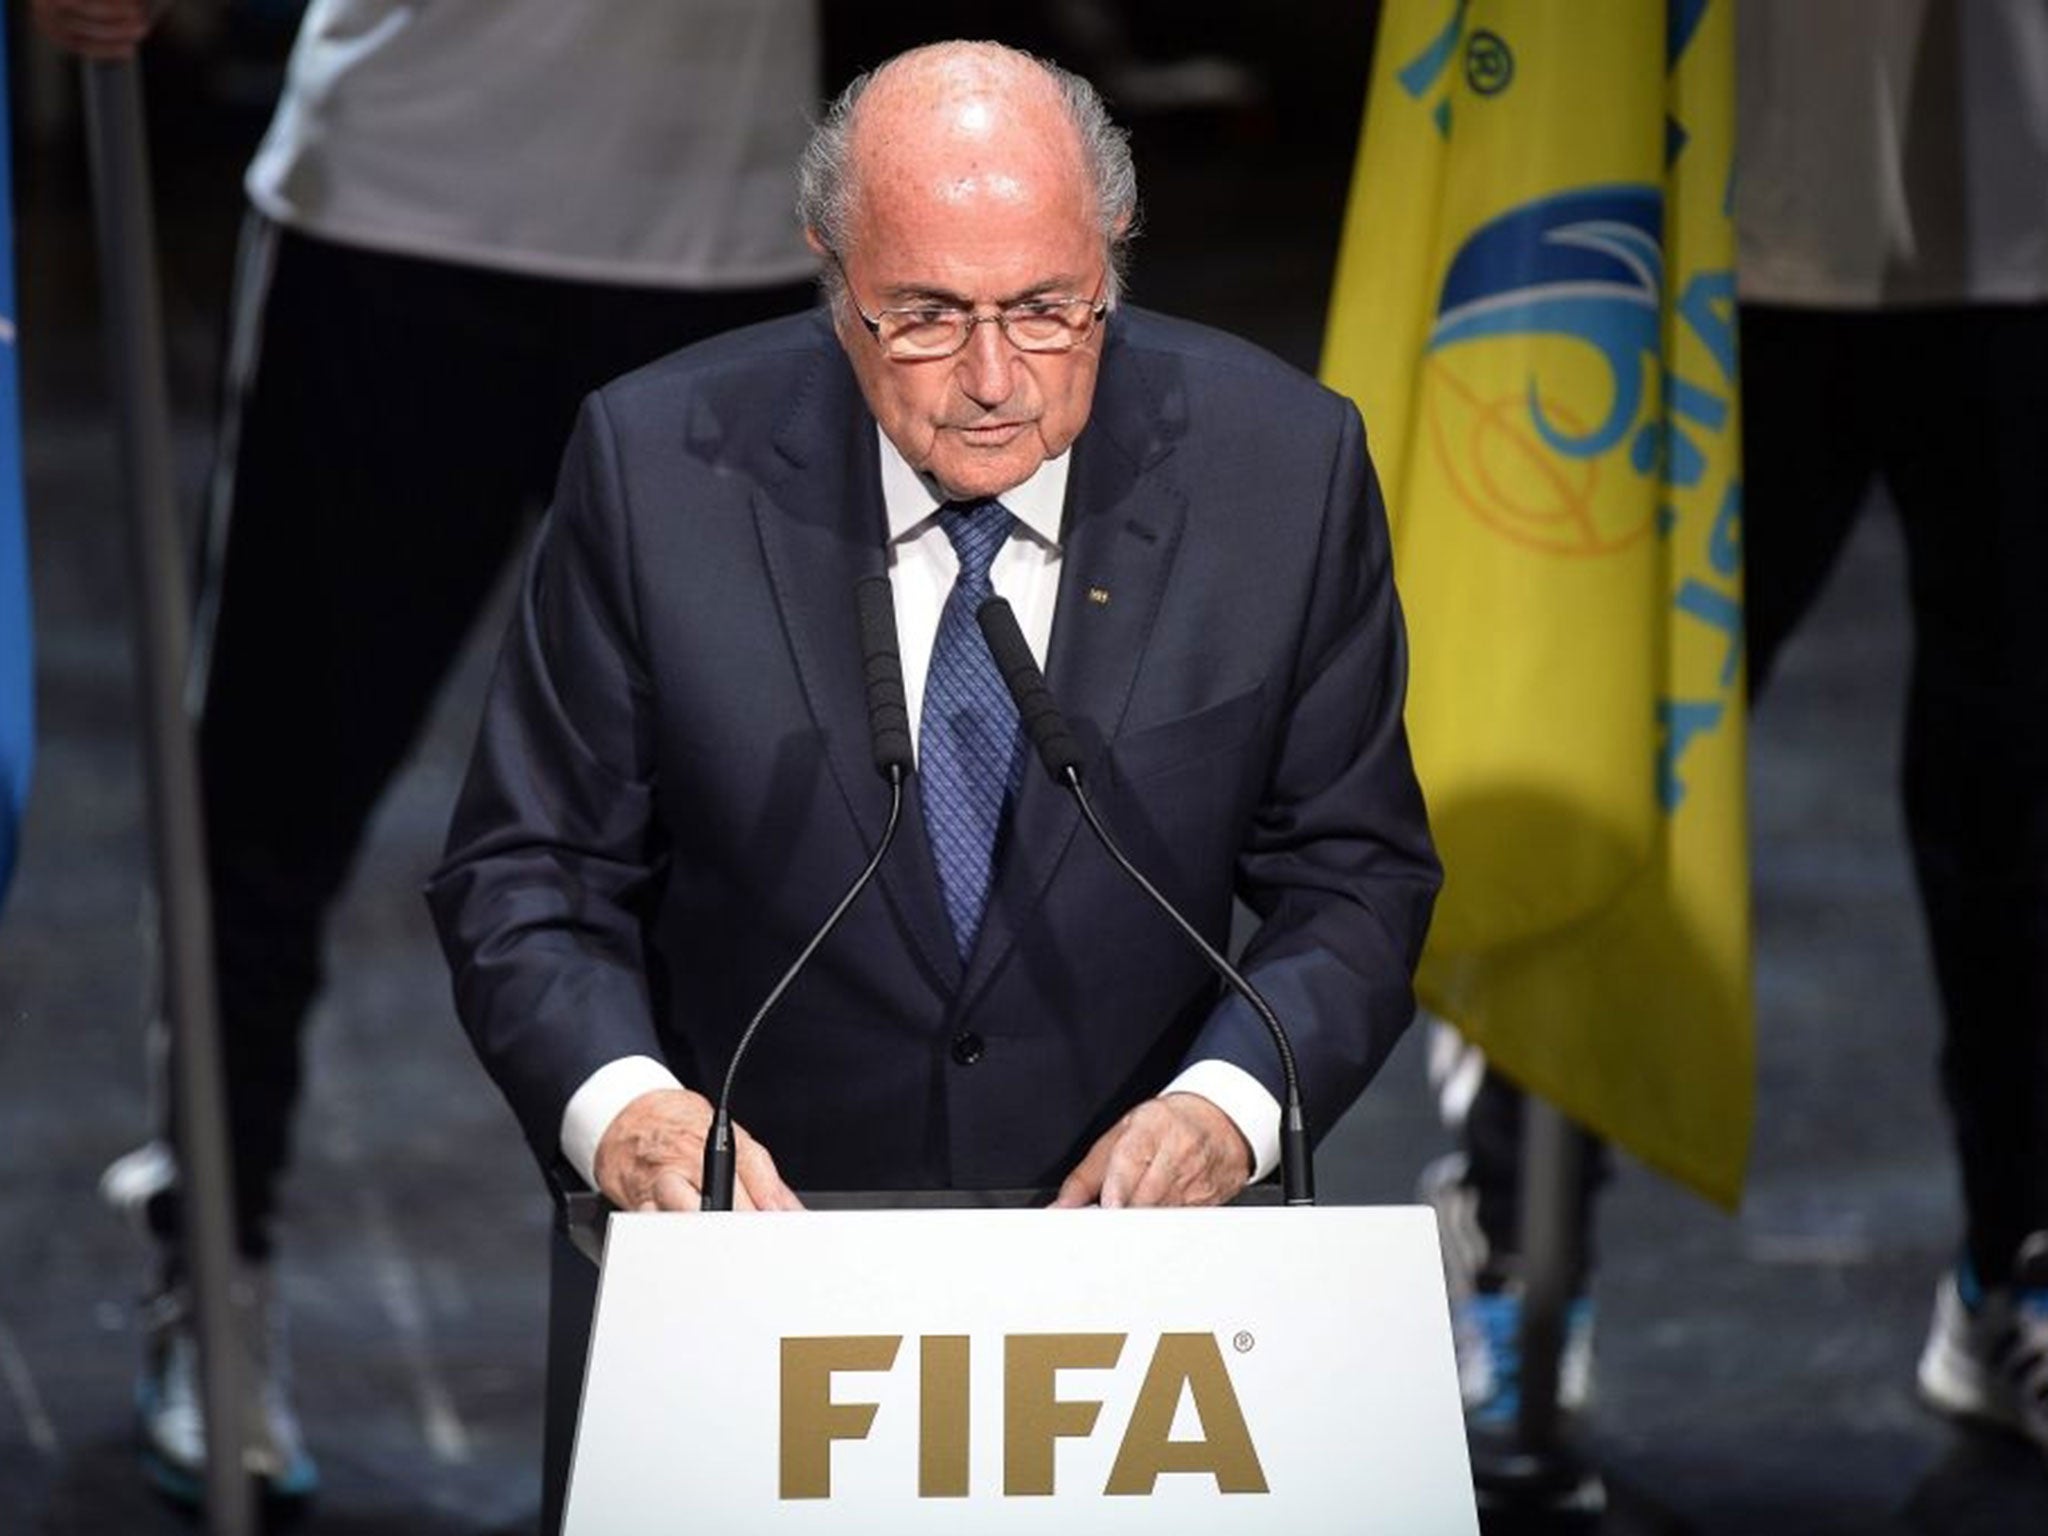 FIFA President Joseph Blatter makes his first public appearance since the corruption scandal erupted